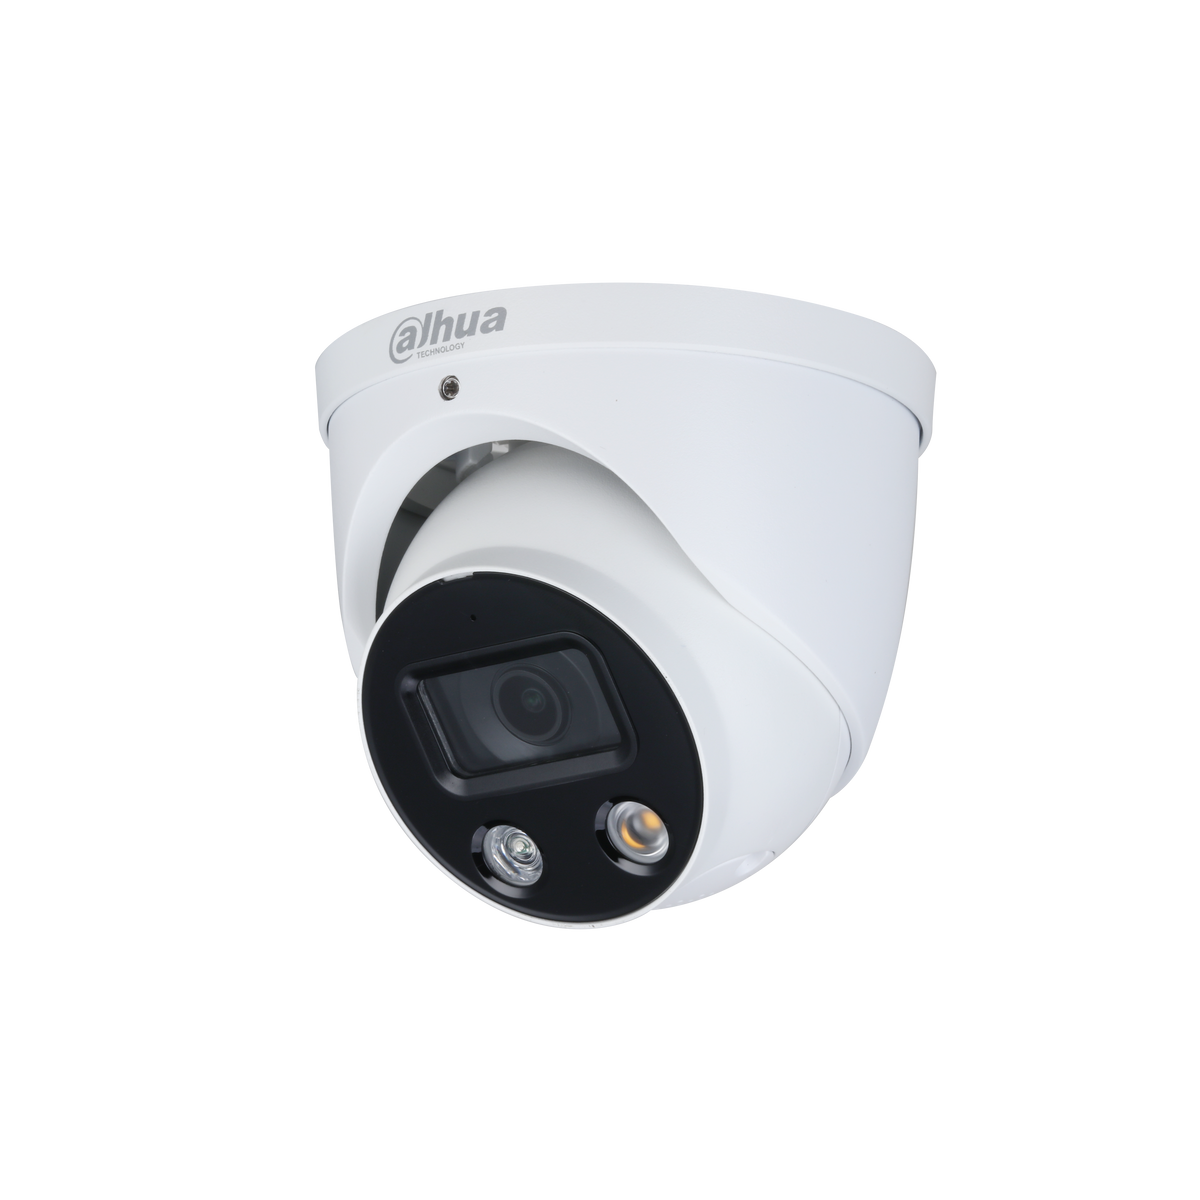 5 MP Full-color Active Deterrence Fixed-focal Eyeball WizSense Network Camera DH-IPC-HDW3549H-AS-PV